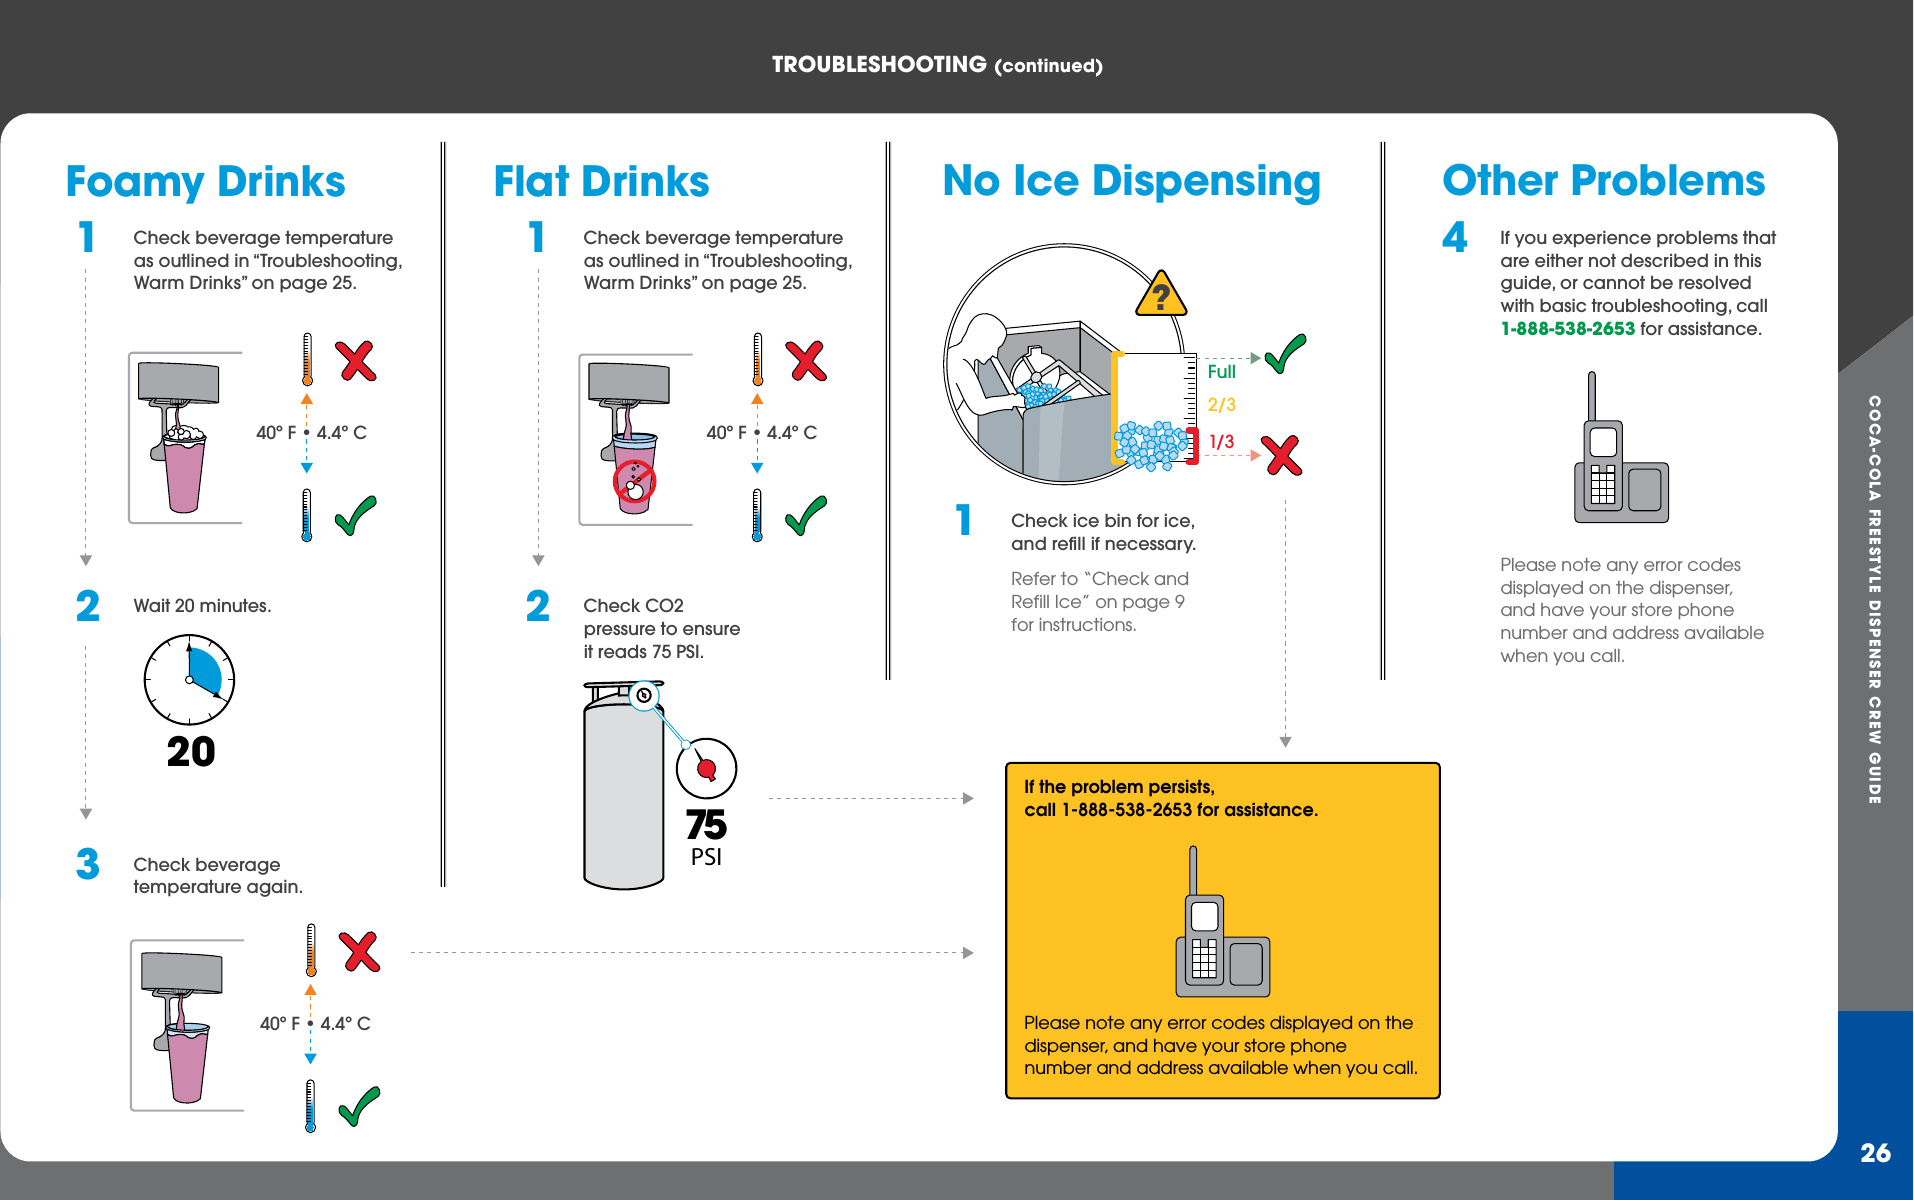 COCA-COLA FREESTYLE DISPENSER CREW GUIDETROUBLEShOOTING (continued)26No Ice Dispensing1  Check ice bin for ice, and refill if necessary.   Refer to “Check and Refill Ice” on page 9 for instructions.?1/32/3Full1  Check beverage temperature as outlined in “Troubleshooting, Warm Drinks” on page 25. If the problem persists, call 1-888-538-2653 for assistance.    Please note any error codes displayed on the dispenser, and have your store phone number and address available when you call.4  If you experience problems that are either not described in this guide, or cannot be resolved with basic troubleshooting, call 1-888-538-2653 for assistance.   Please note any error codes displayed on the dispenser, and have your store phone number and address available when you call.Foamy Drinks2  Wait 20 minutes.20&amp;s#Other Problems3  Check beverage temperature again.&amp;s#1  Check beverage temperature as outlined in “Troubleshooting, Warm Drinks” on page 25.Flat Drinks&amp;s#2  Check CO2 pressure to ensure it reads 75 PSI.75PSI